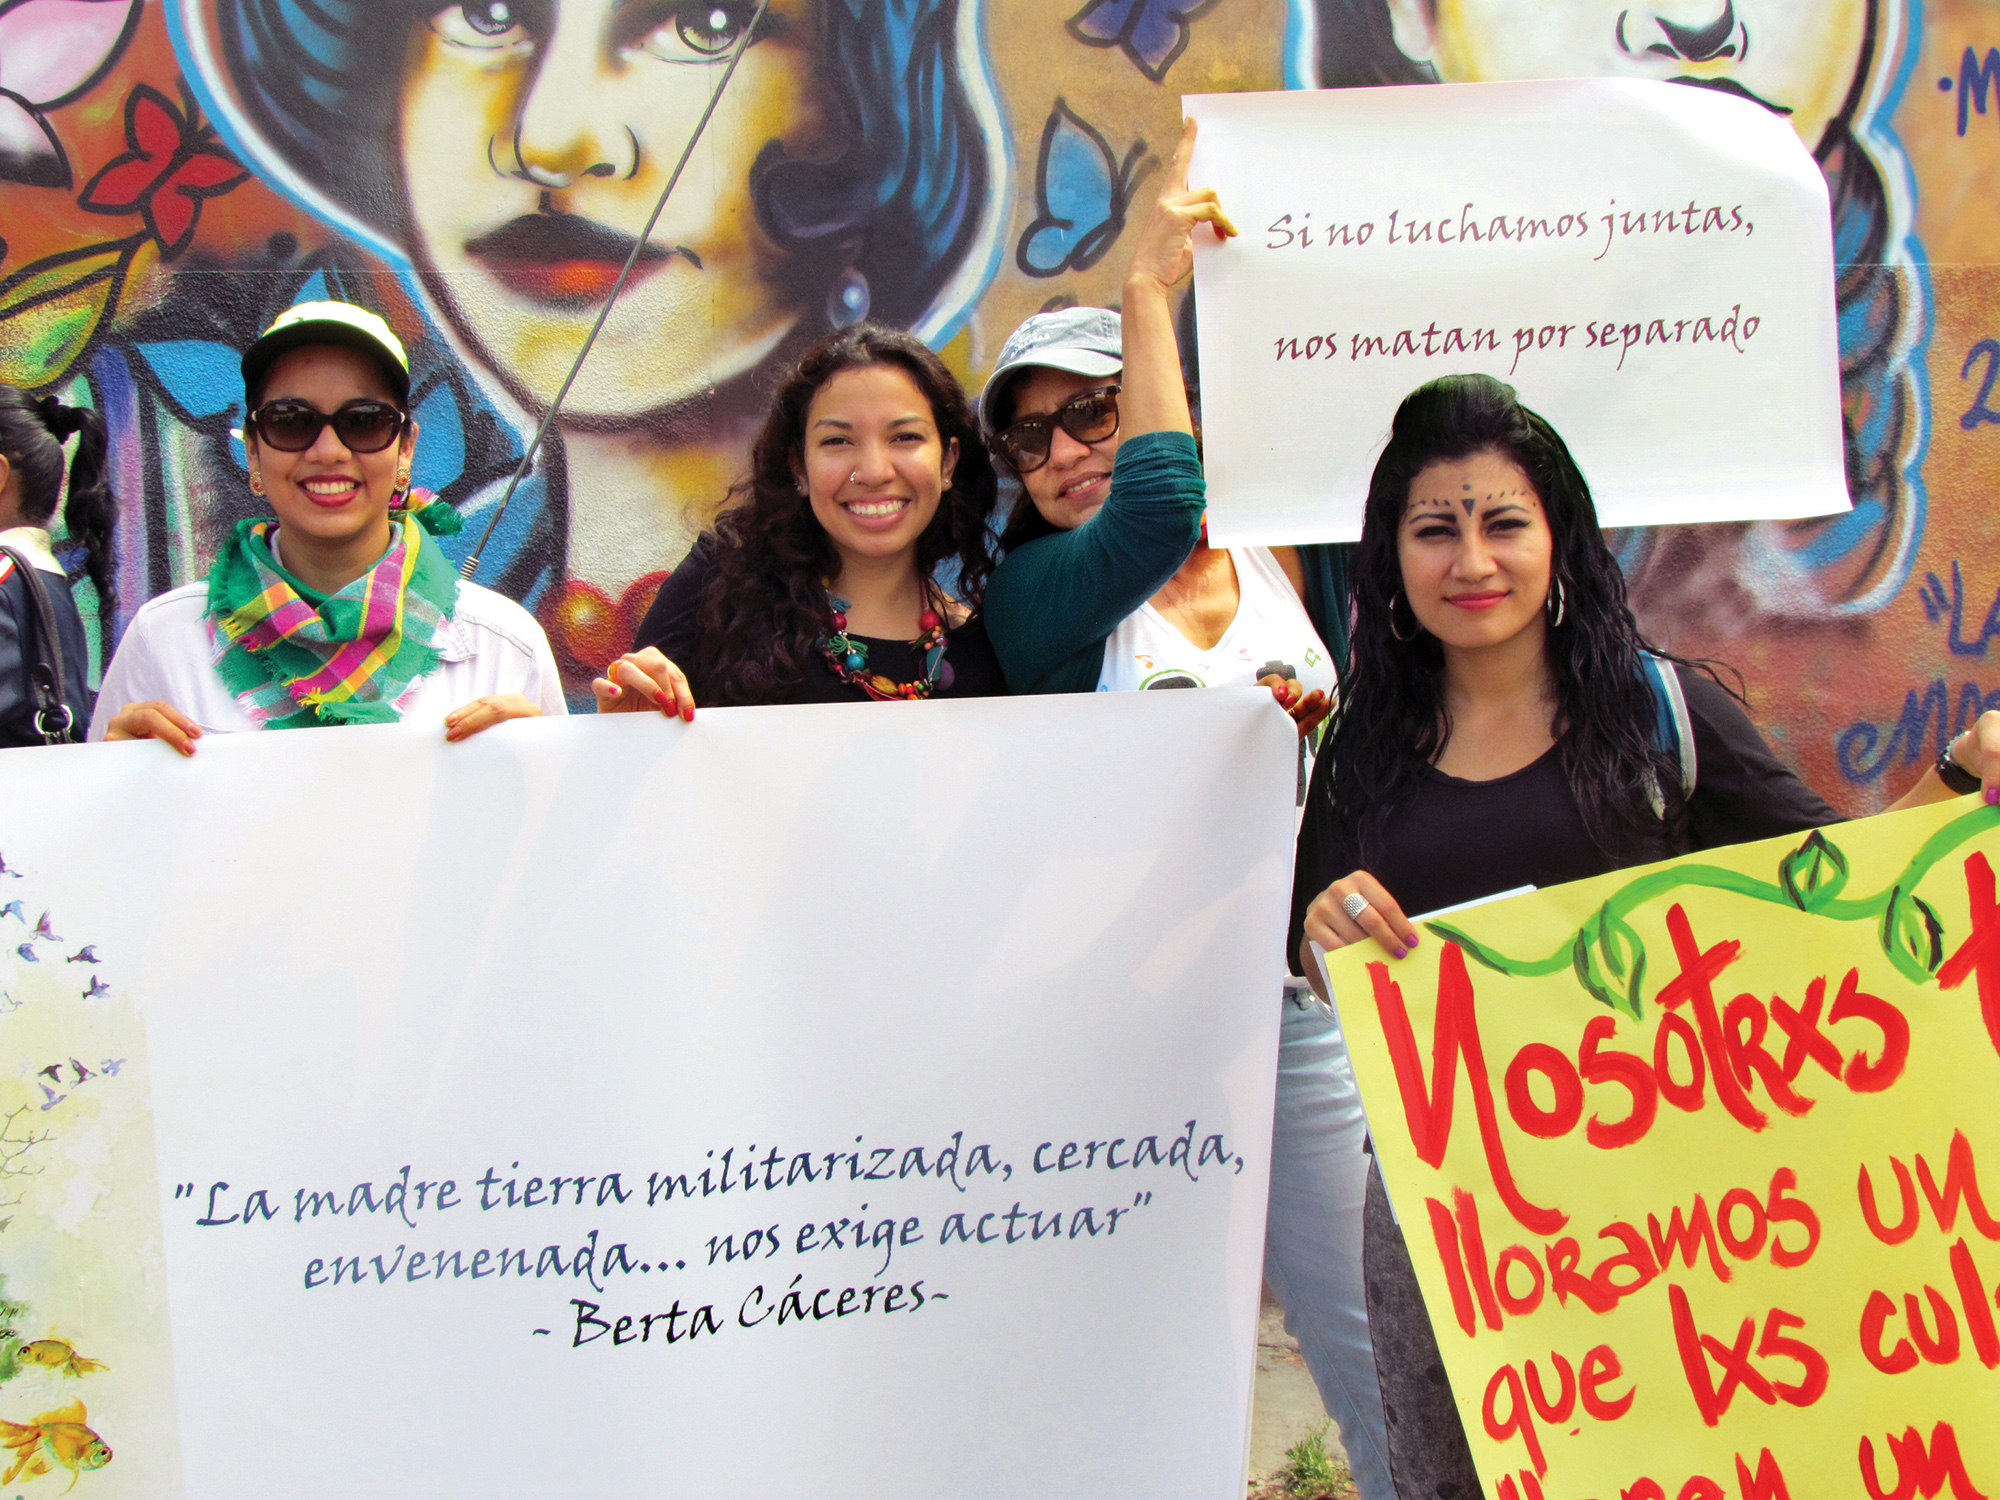 Women holding banners and signs